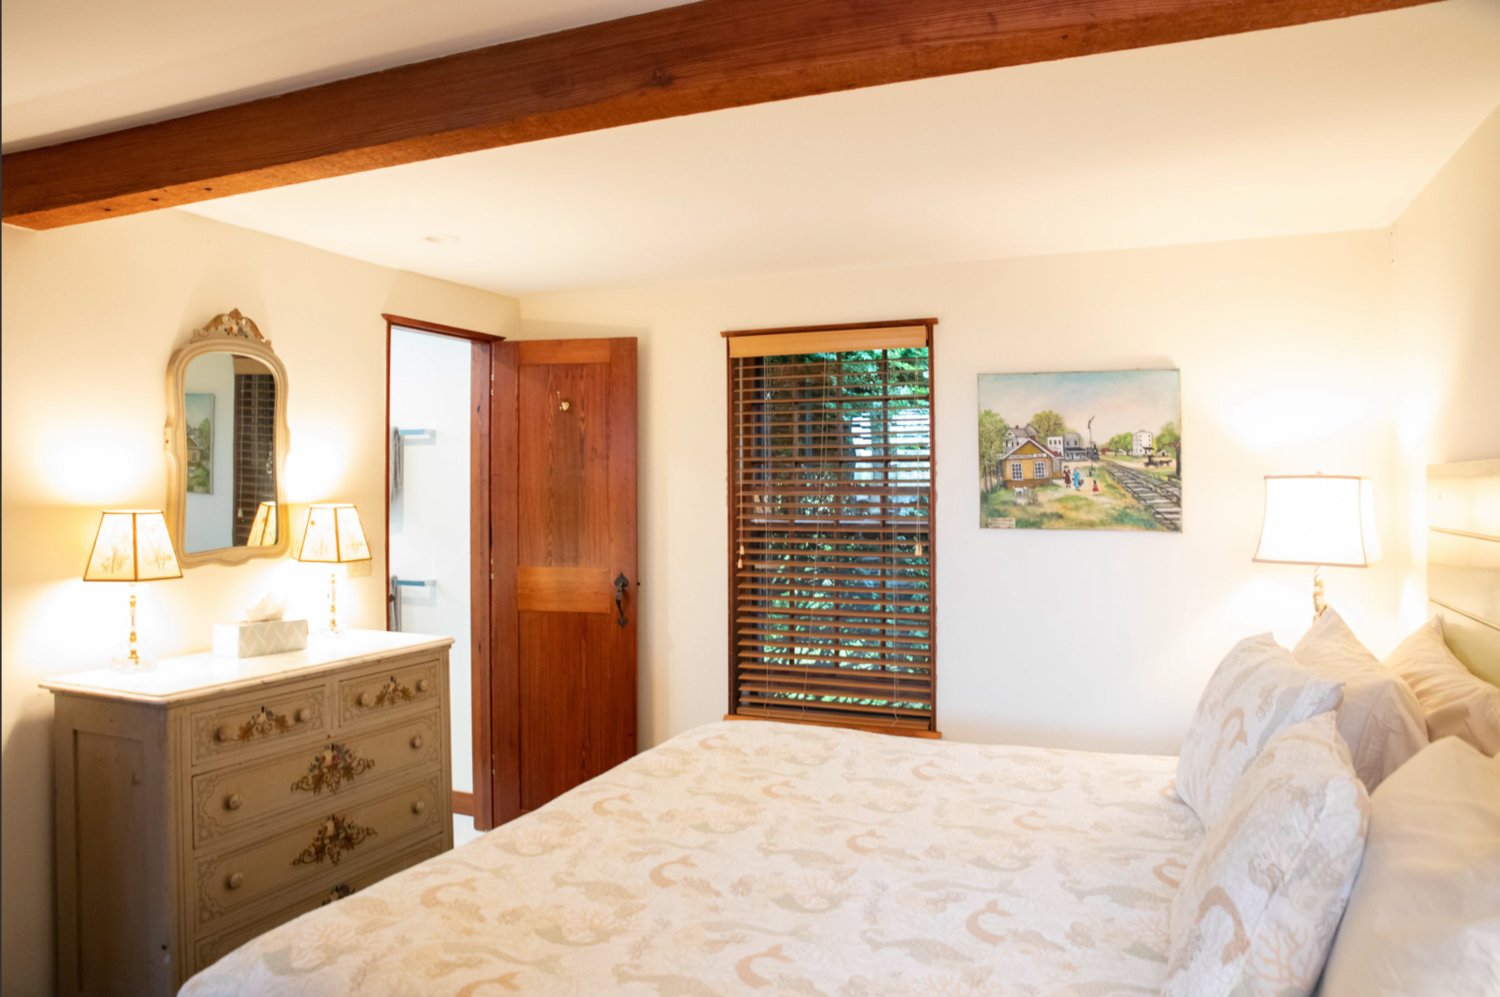 The main house features a master bedroom as well as a guest bedroom with an en-suite bathroom.